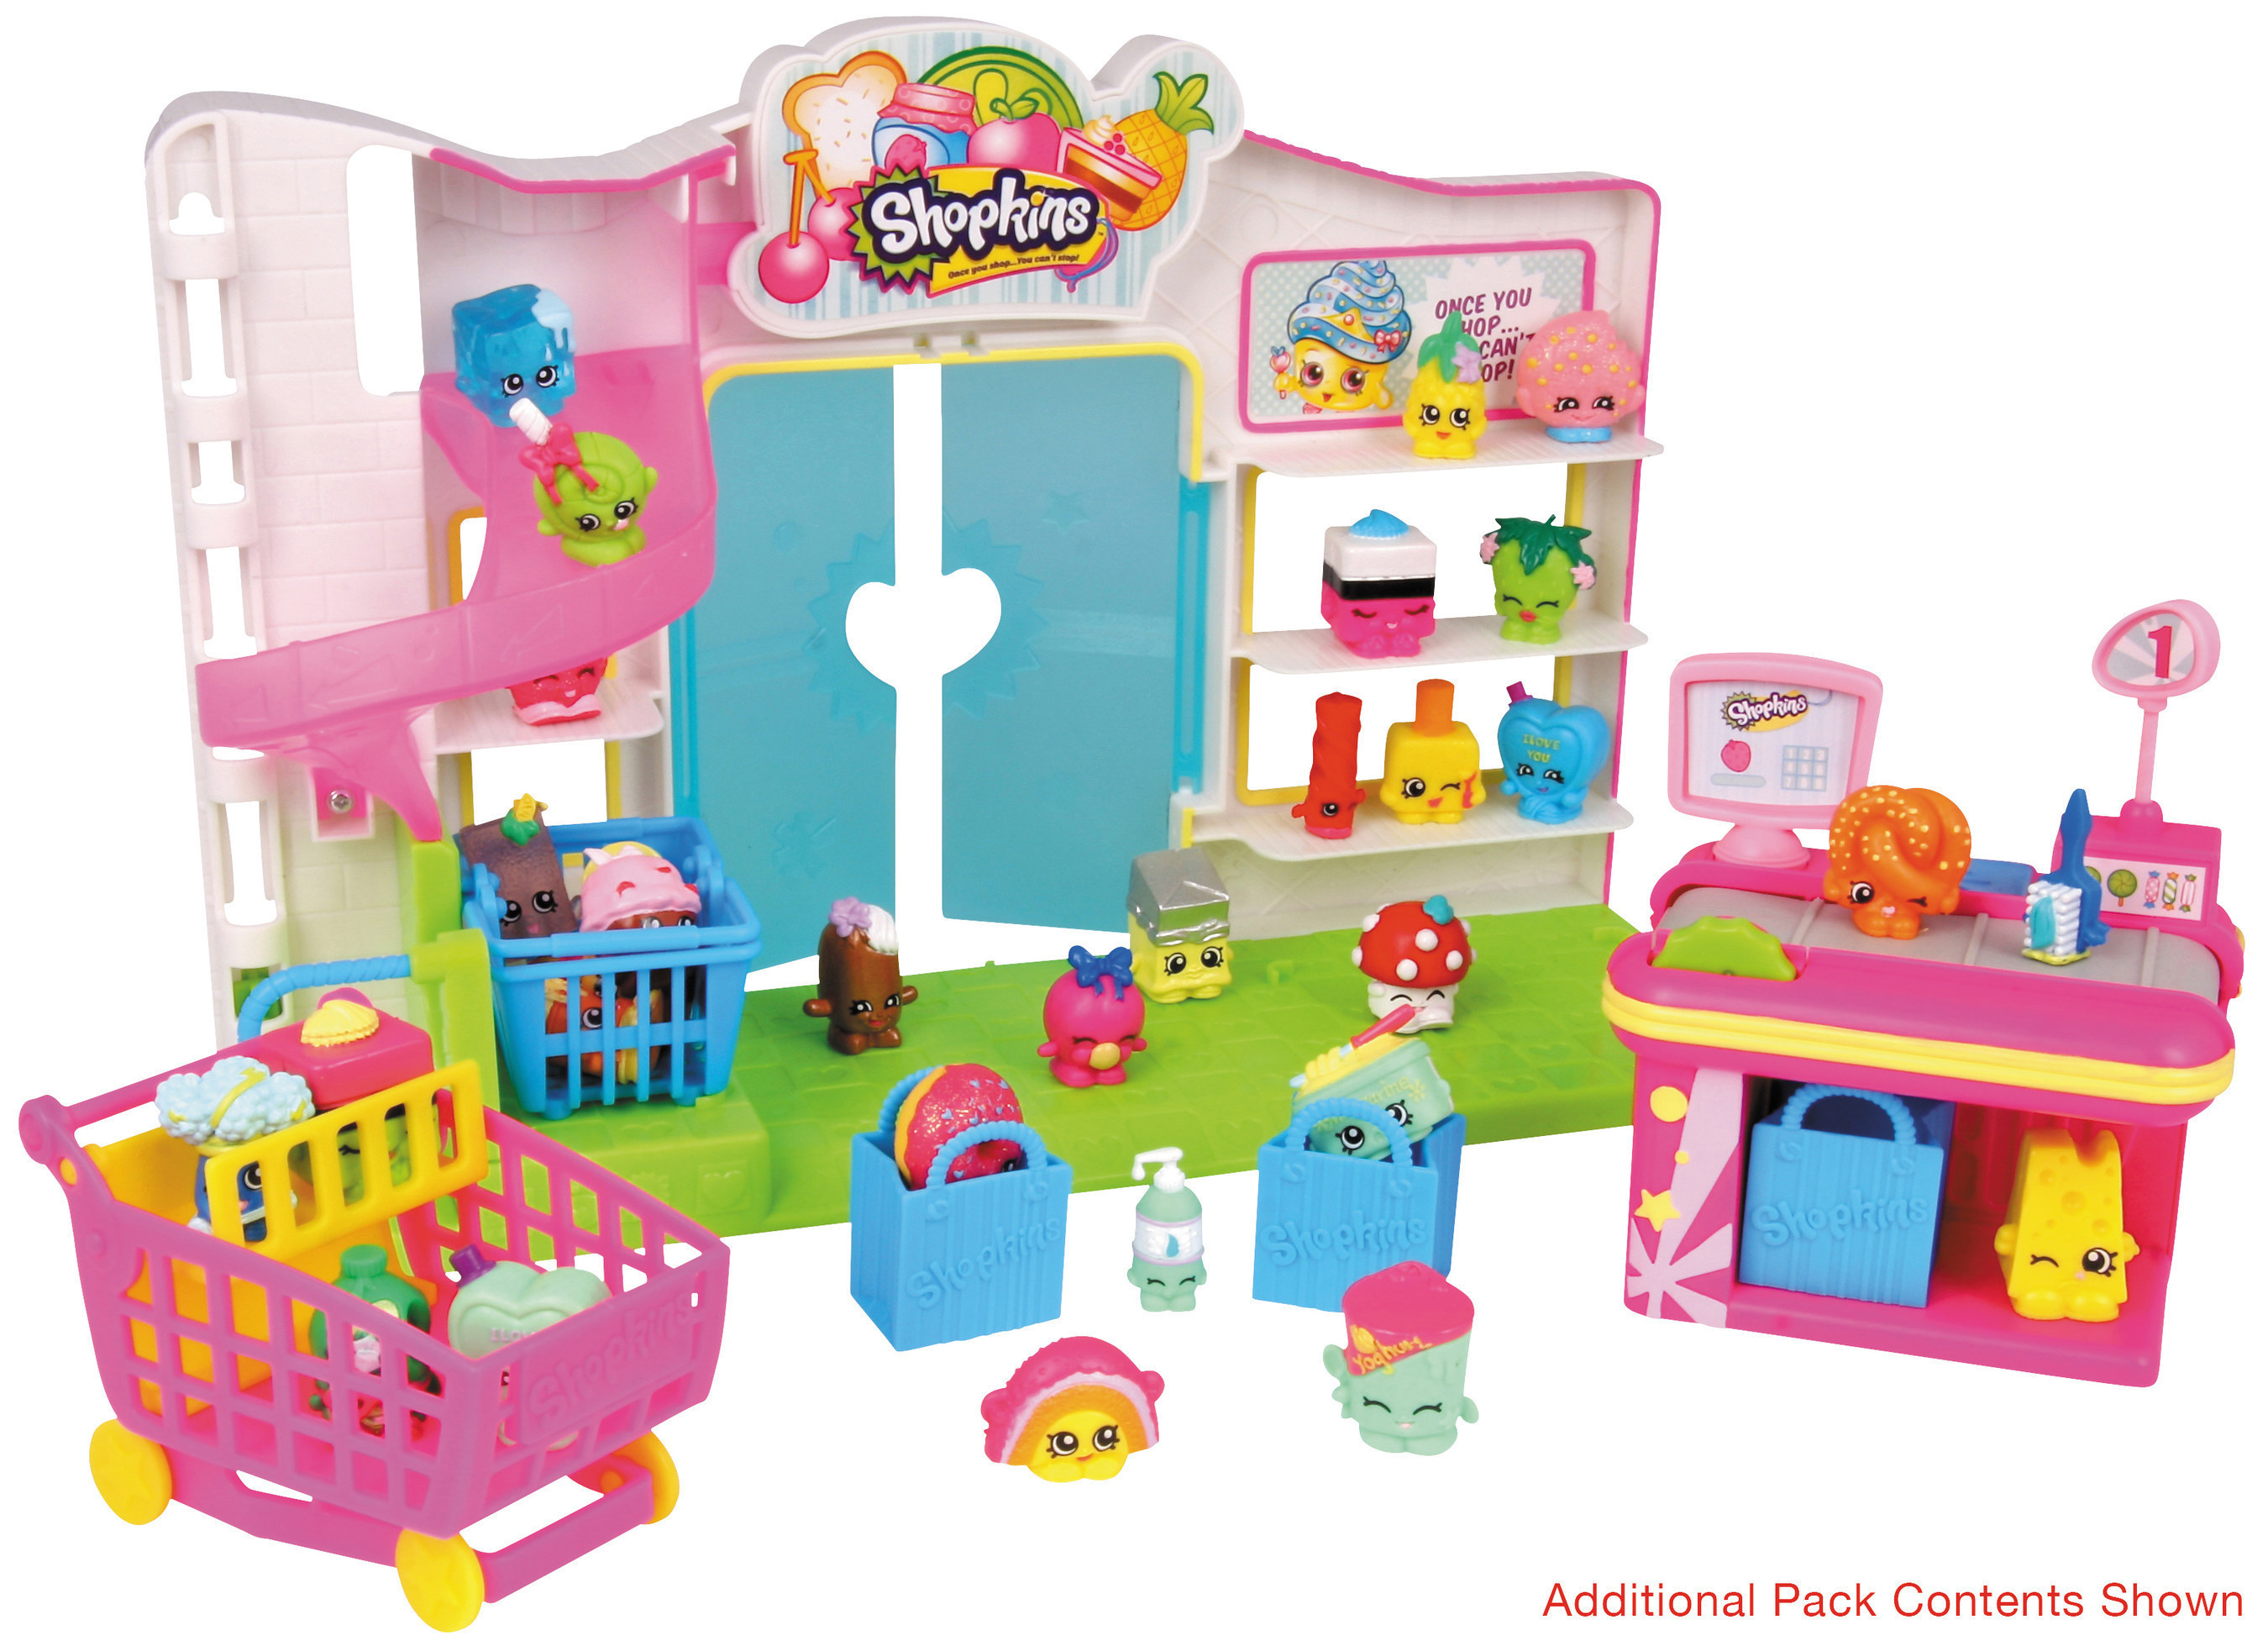 Shopkins™ Small Mart Wins Girl Toy of the Year Award